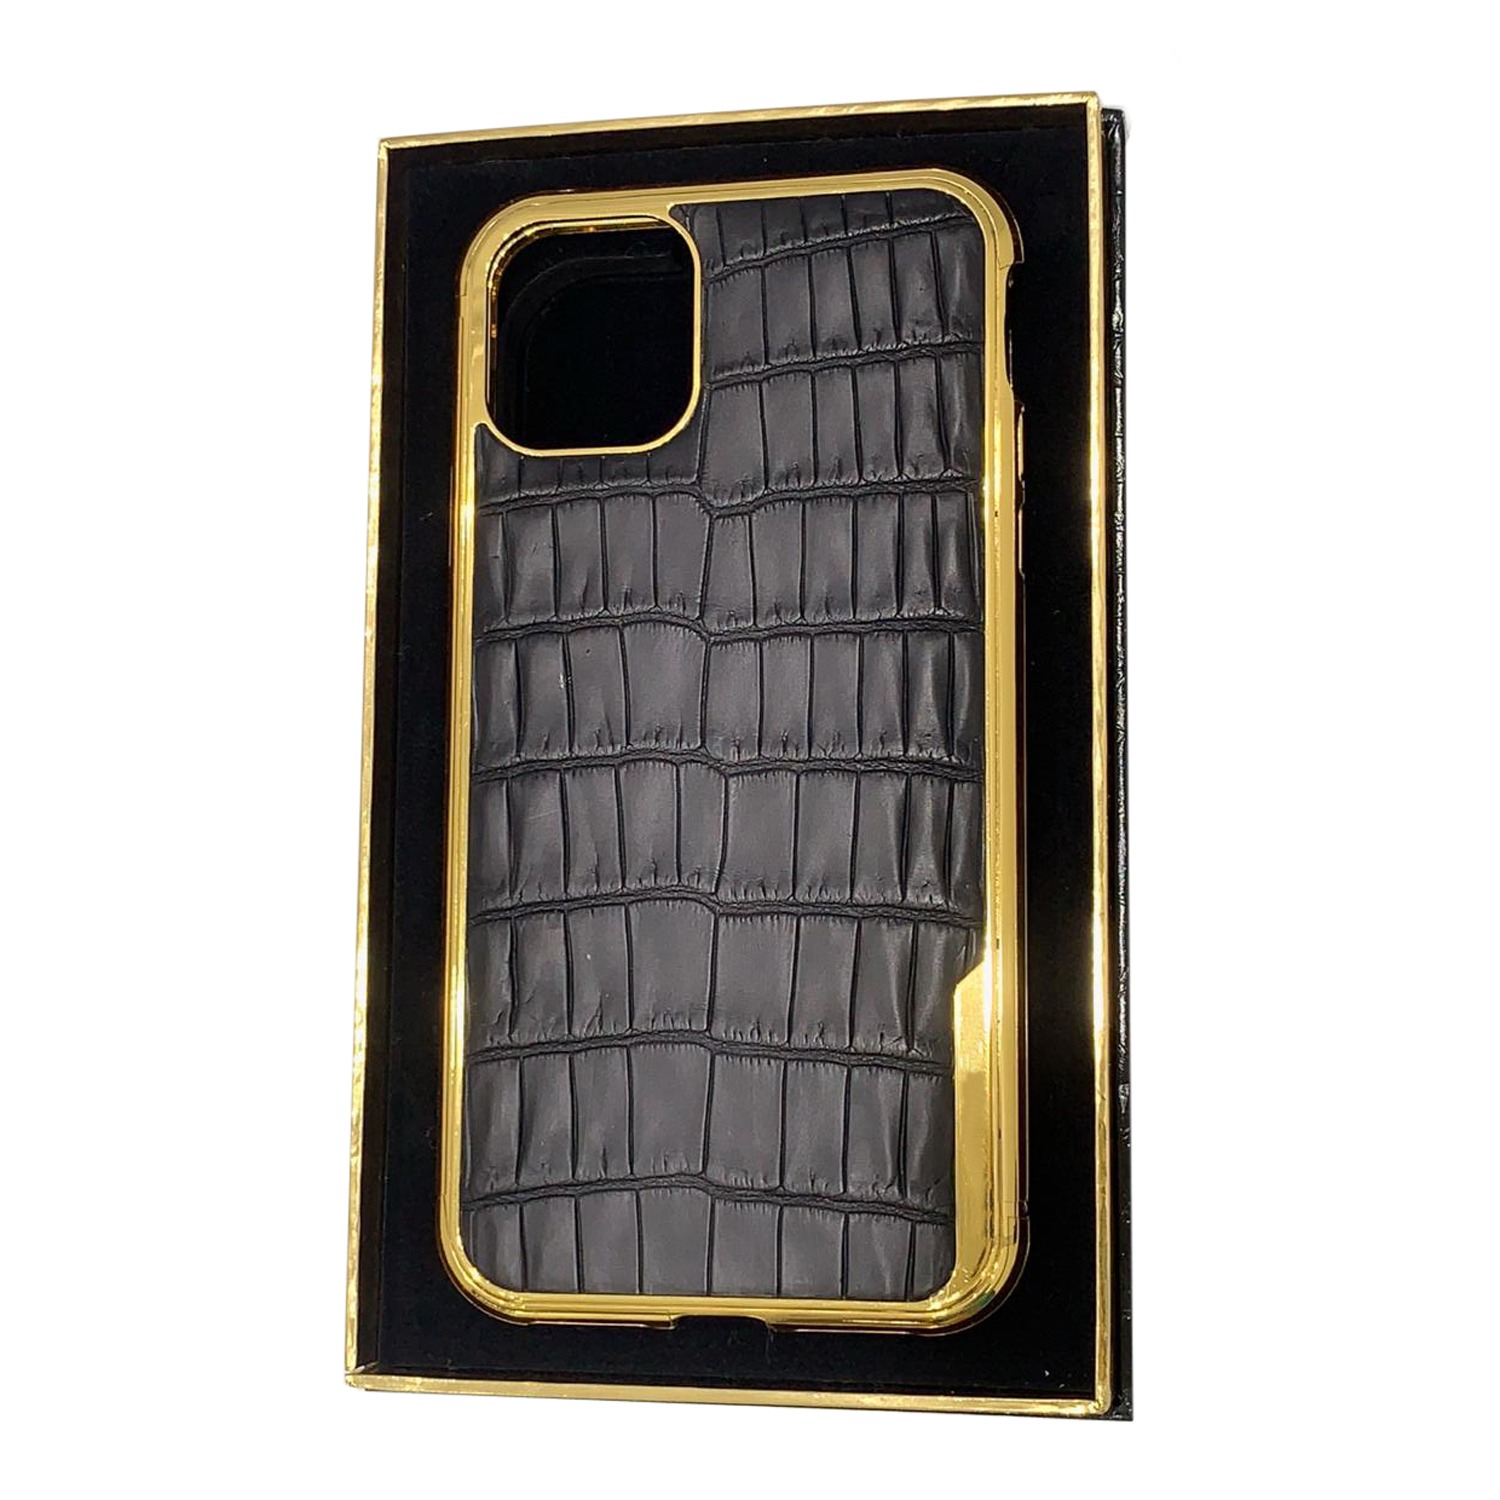 24k Gold Crocodile Black Leather Iphone 12 Pro And 12 Pro Max Case